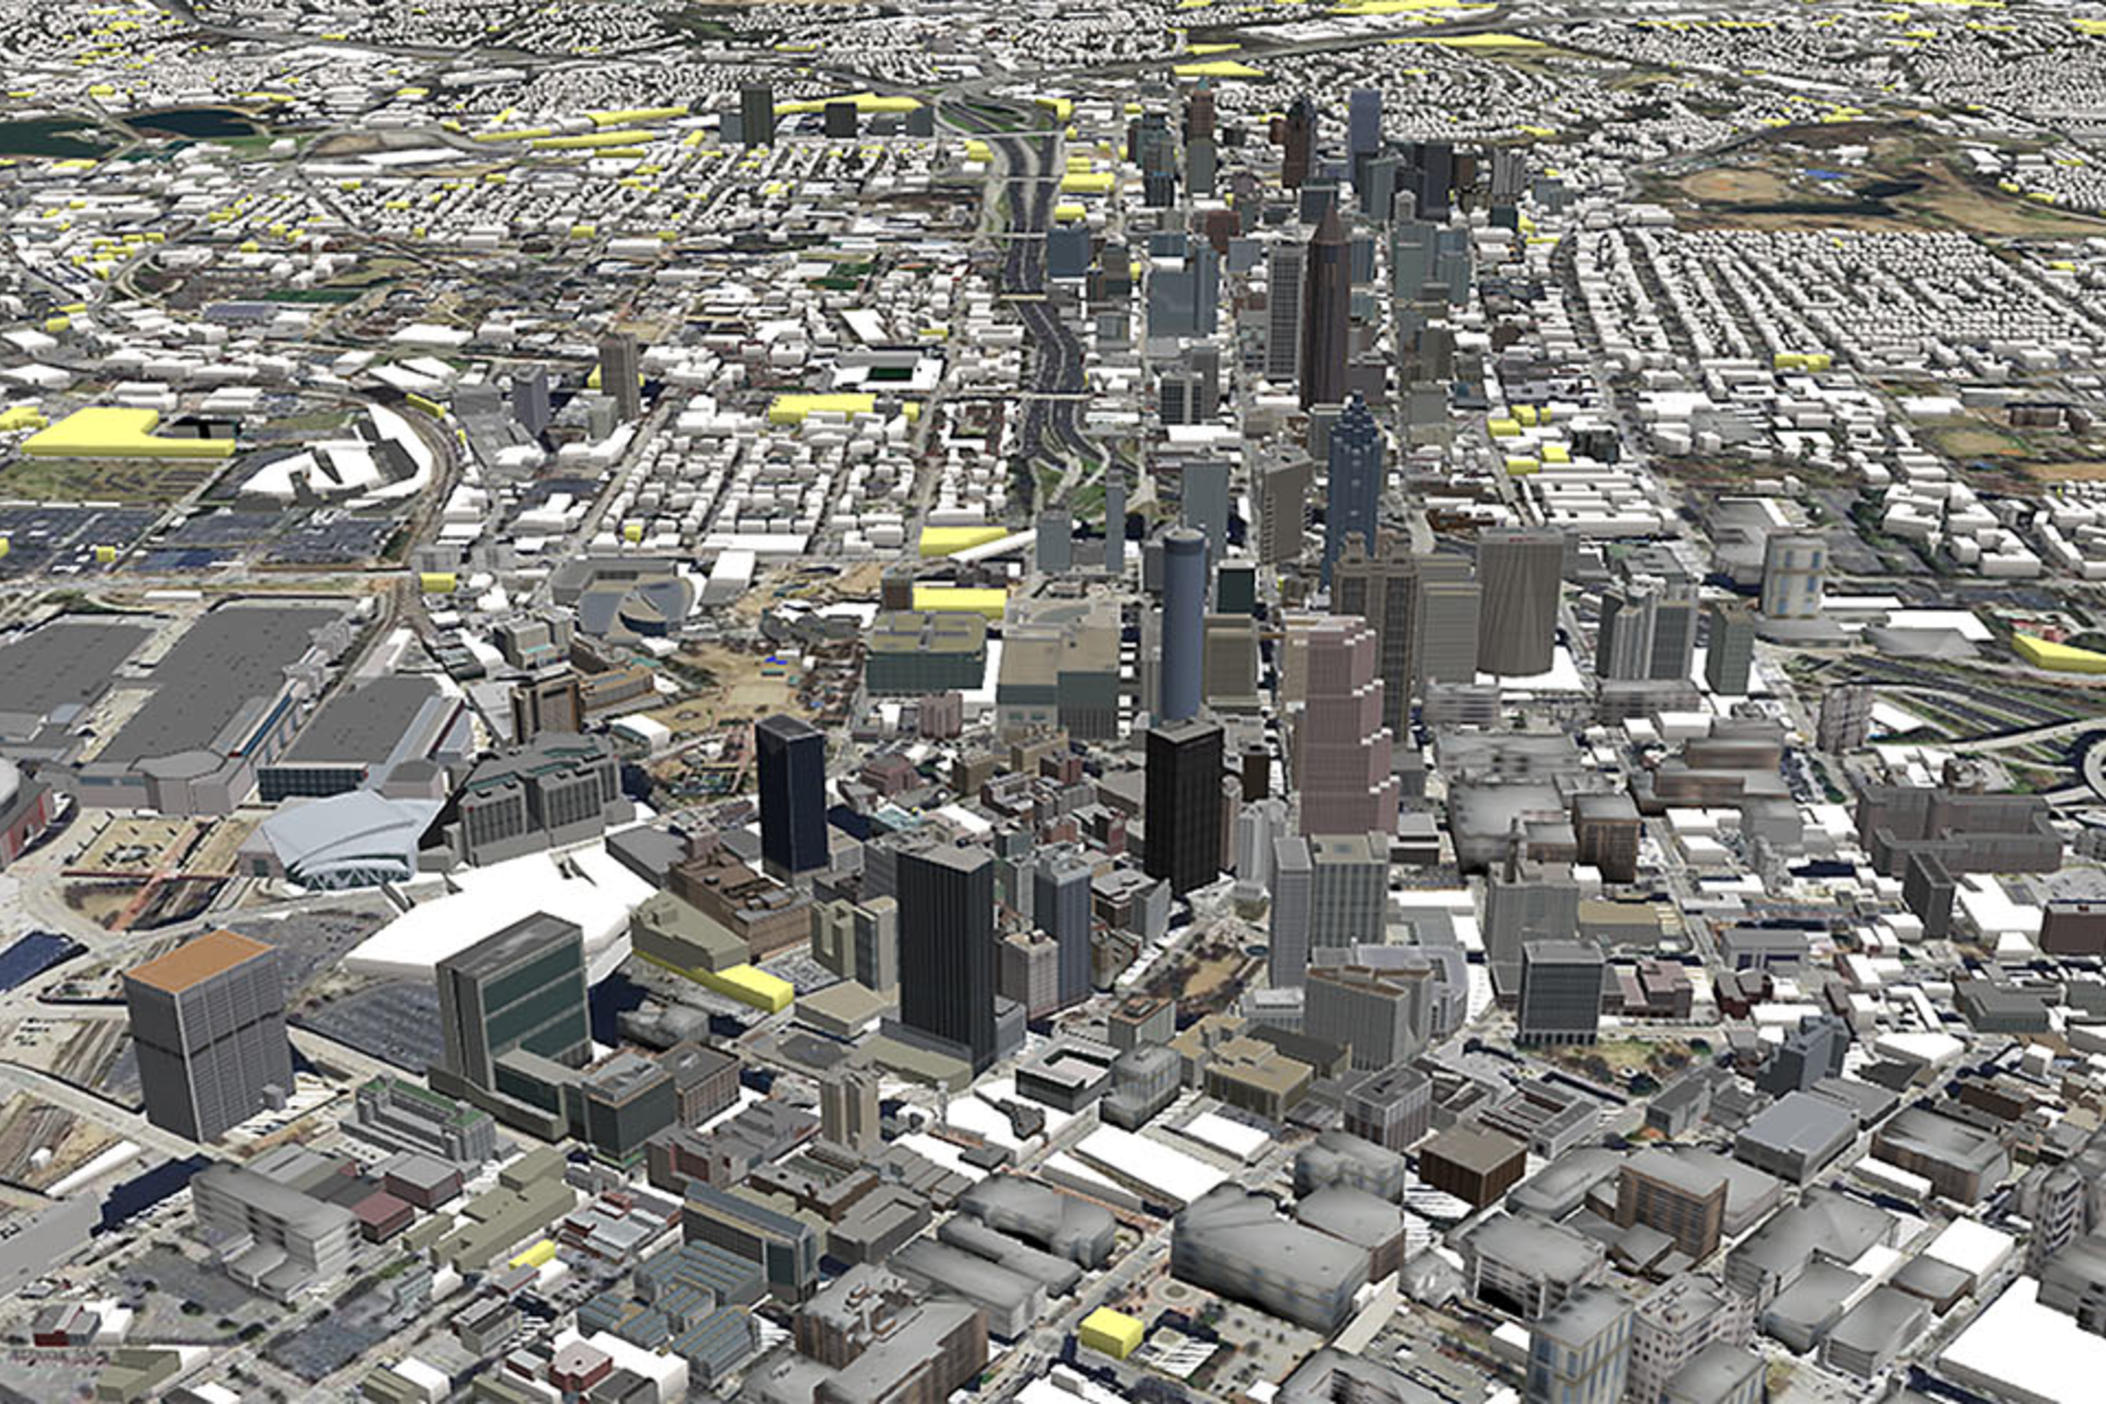 A 3D model of downtown Atlanta, before the construction of Mercedes-Benz Stadium and the demolition of the Georgia Dome